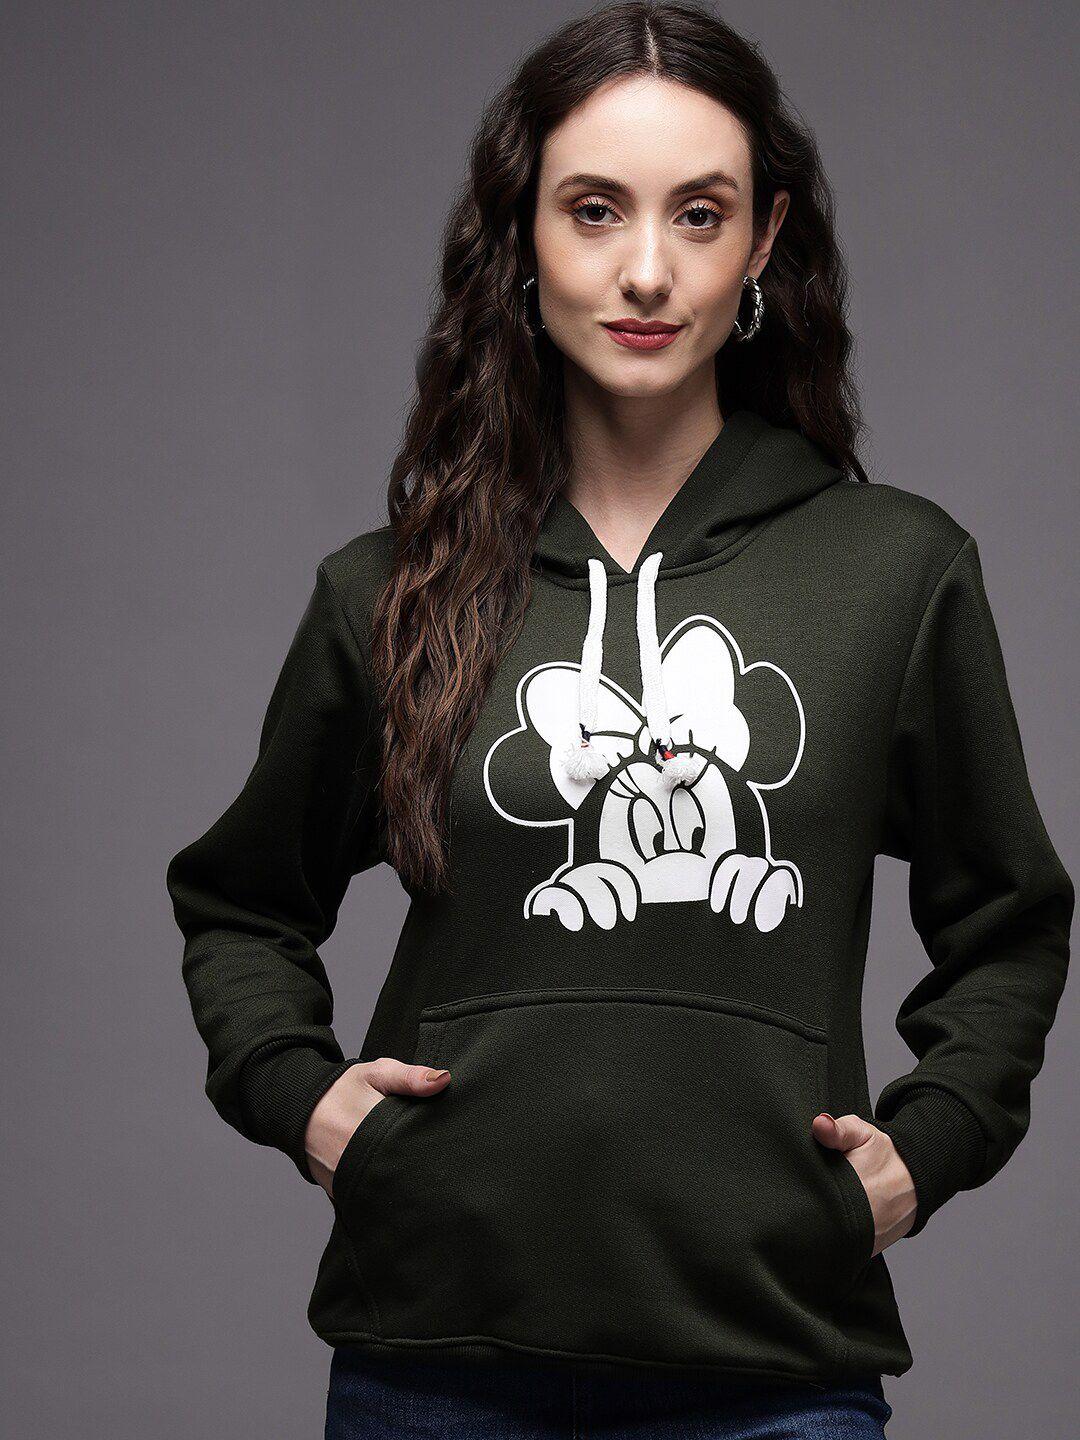 ewools mickey mouse printed hooded neck long sleeve pullover sweatshirt